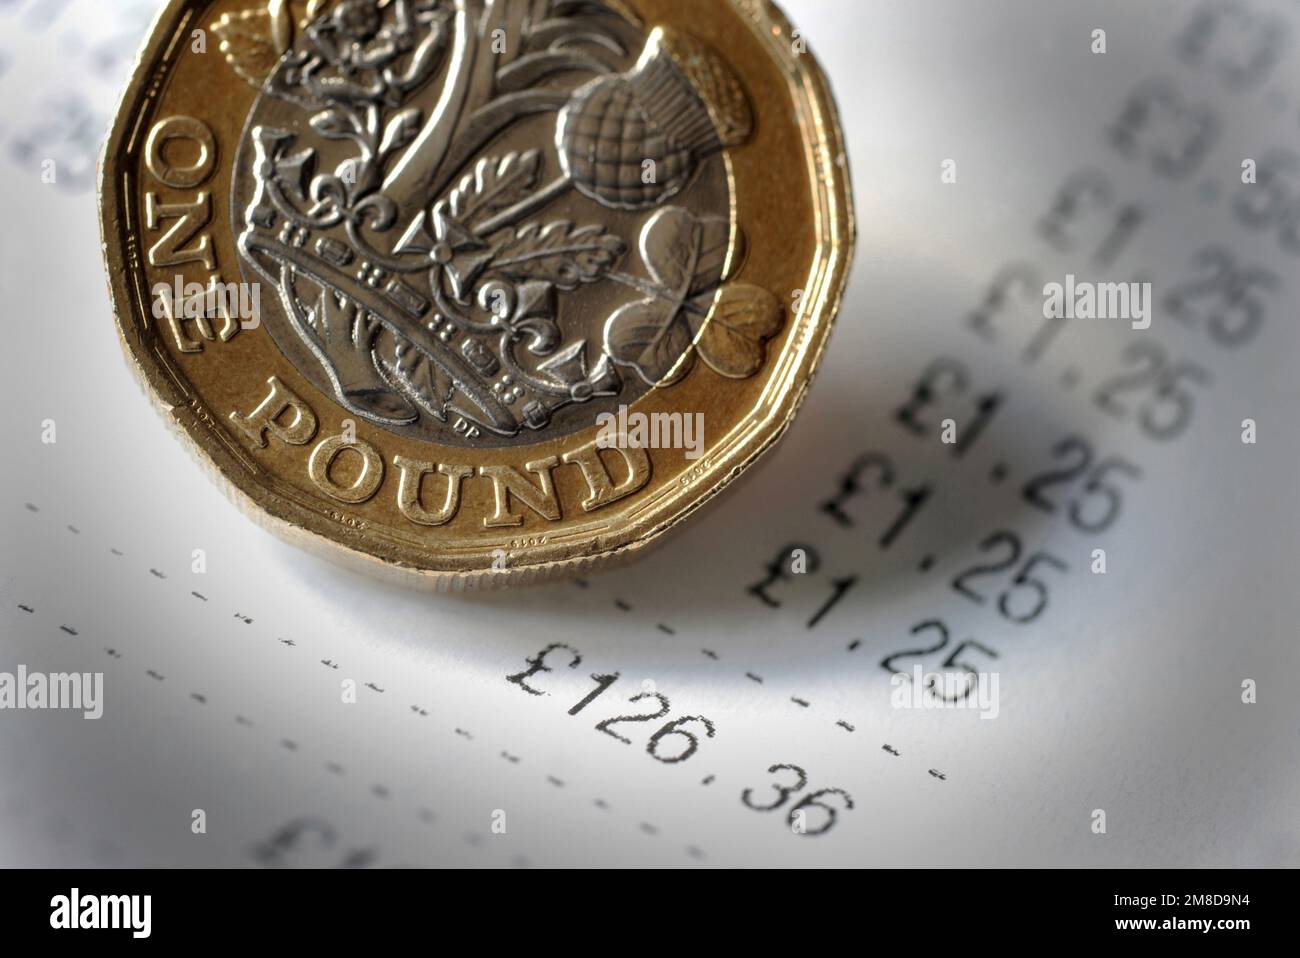 SUPERMARKET FOOD BILL WITH ONE POUND COIN RE COST OF LIVING CRISIS INCOMES SPENDING SHOPPING INFLATION RISING PRICES ETC UK Stock Photo